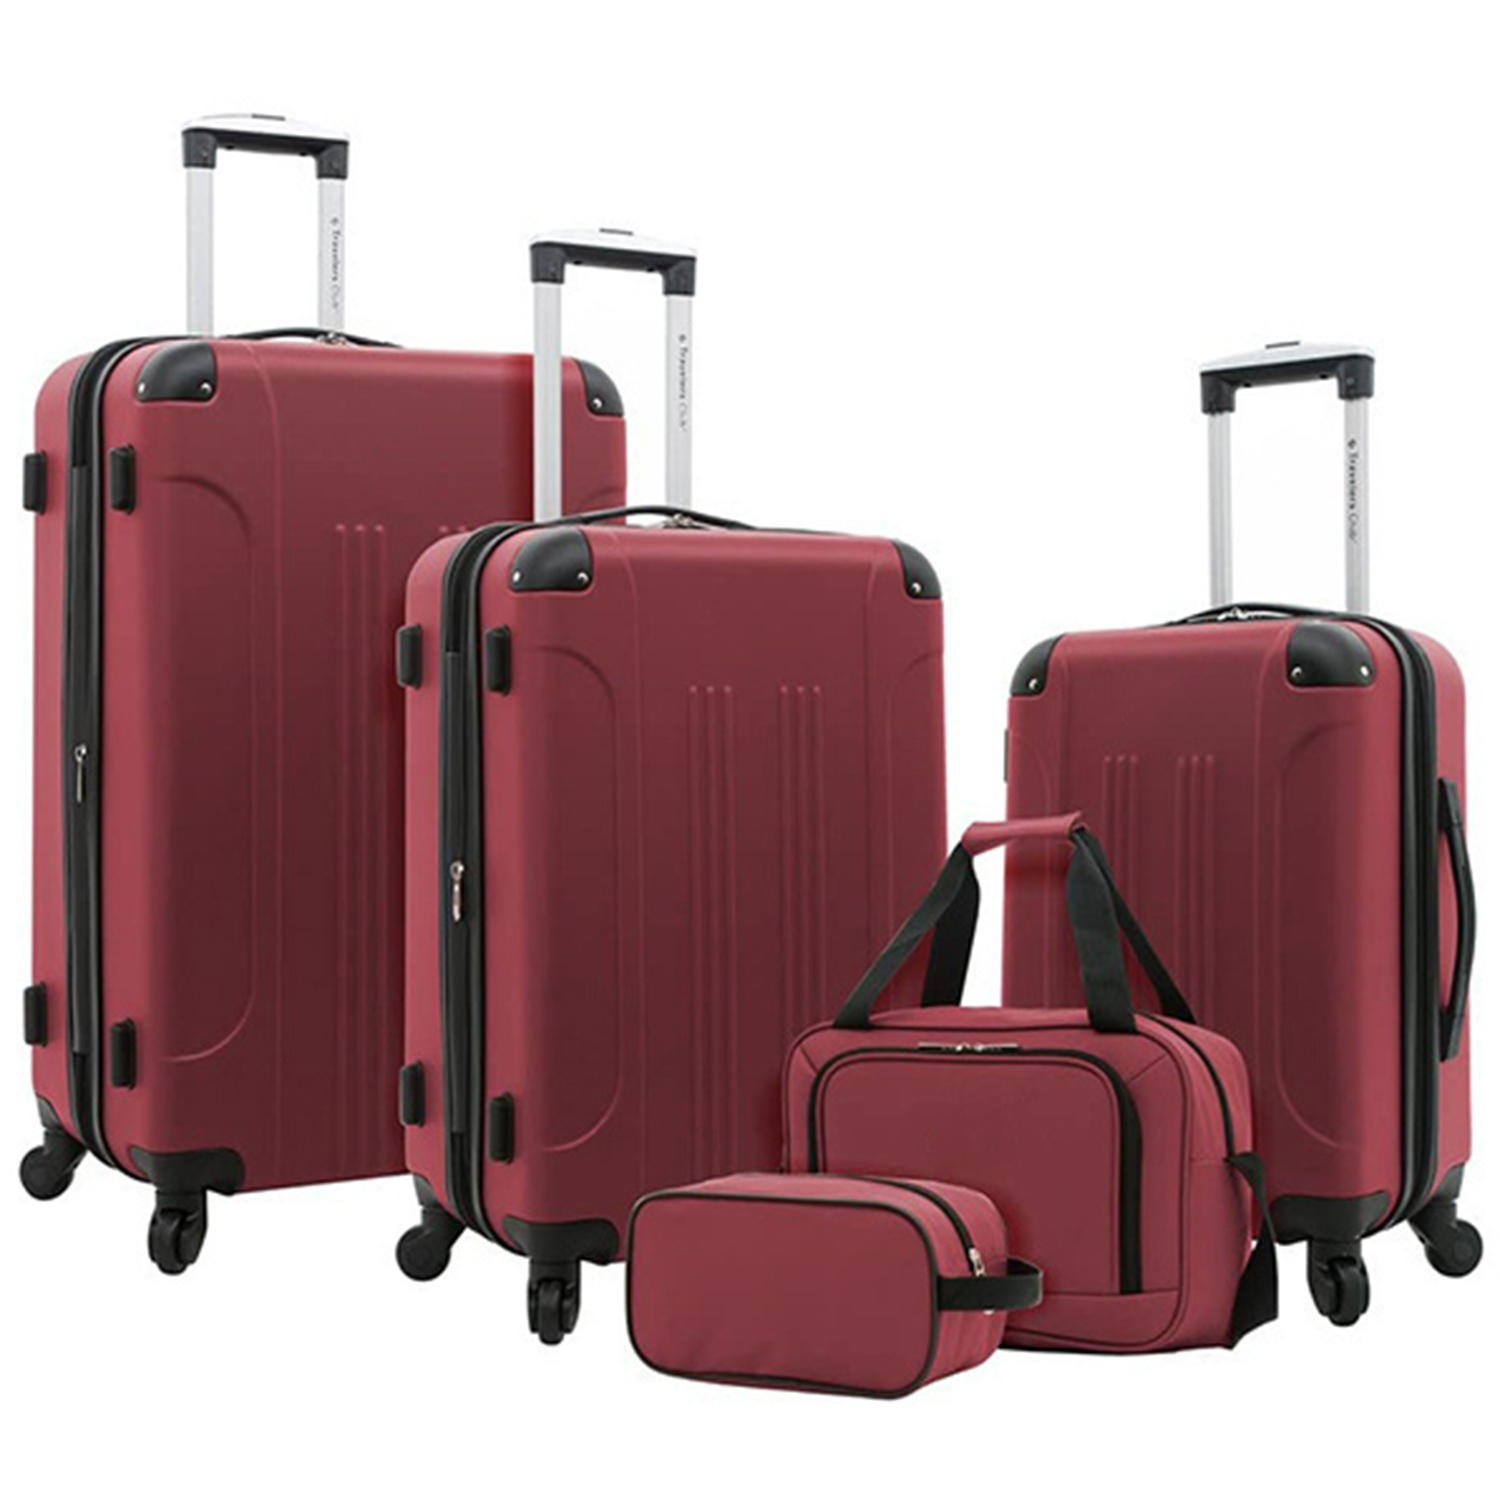 Luggage 5 Piece Set Dark Red-Suitcase clearance